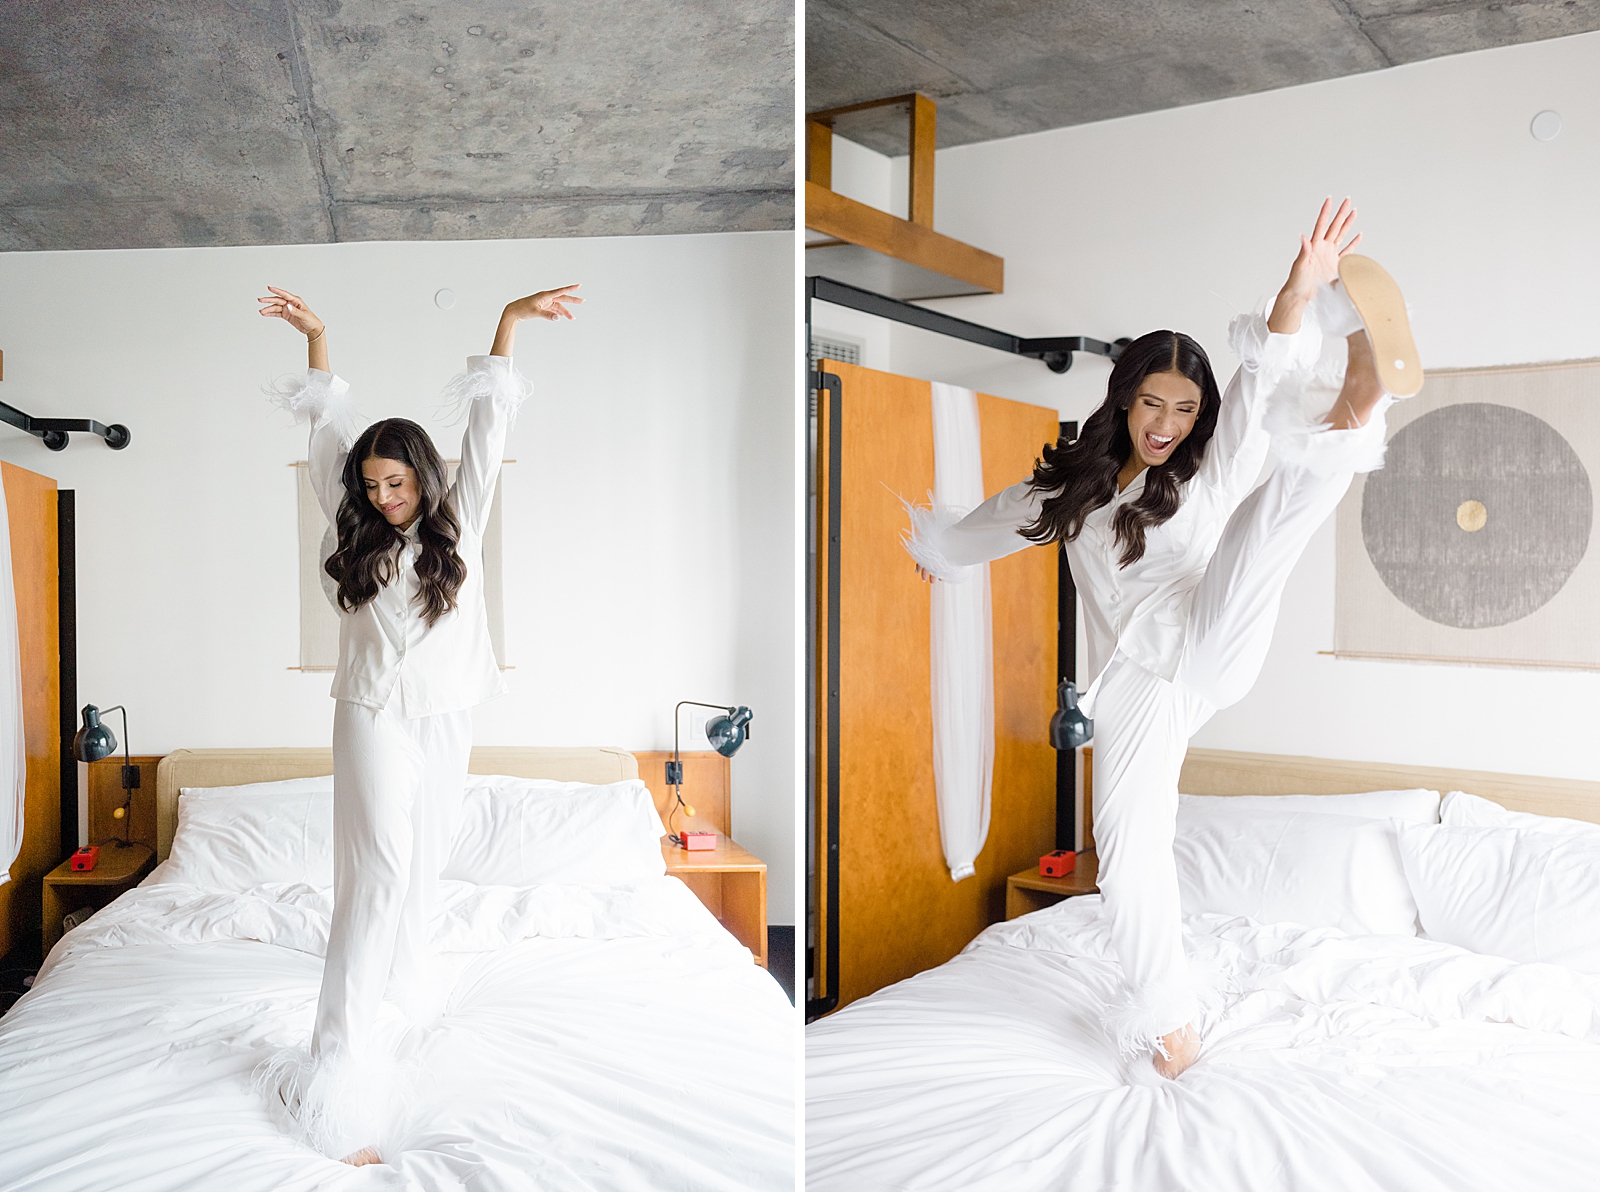 Left photo: Bride dancing on a bed.
Right photo: Bride dancing on a bed.